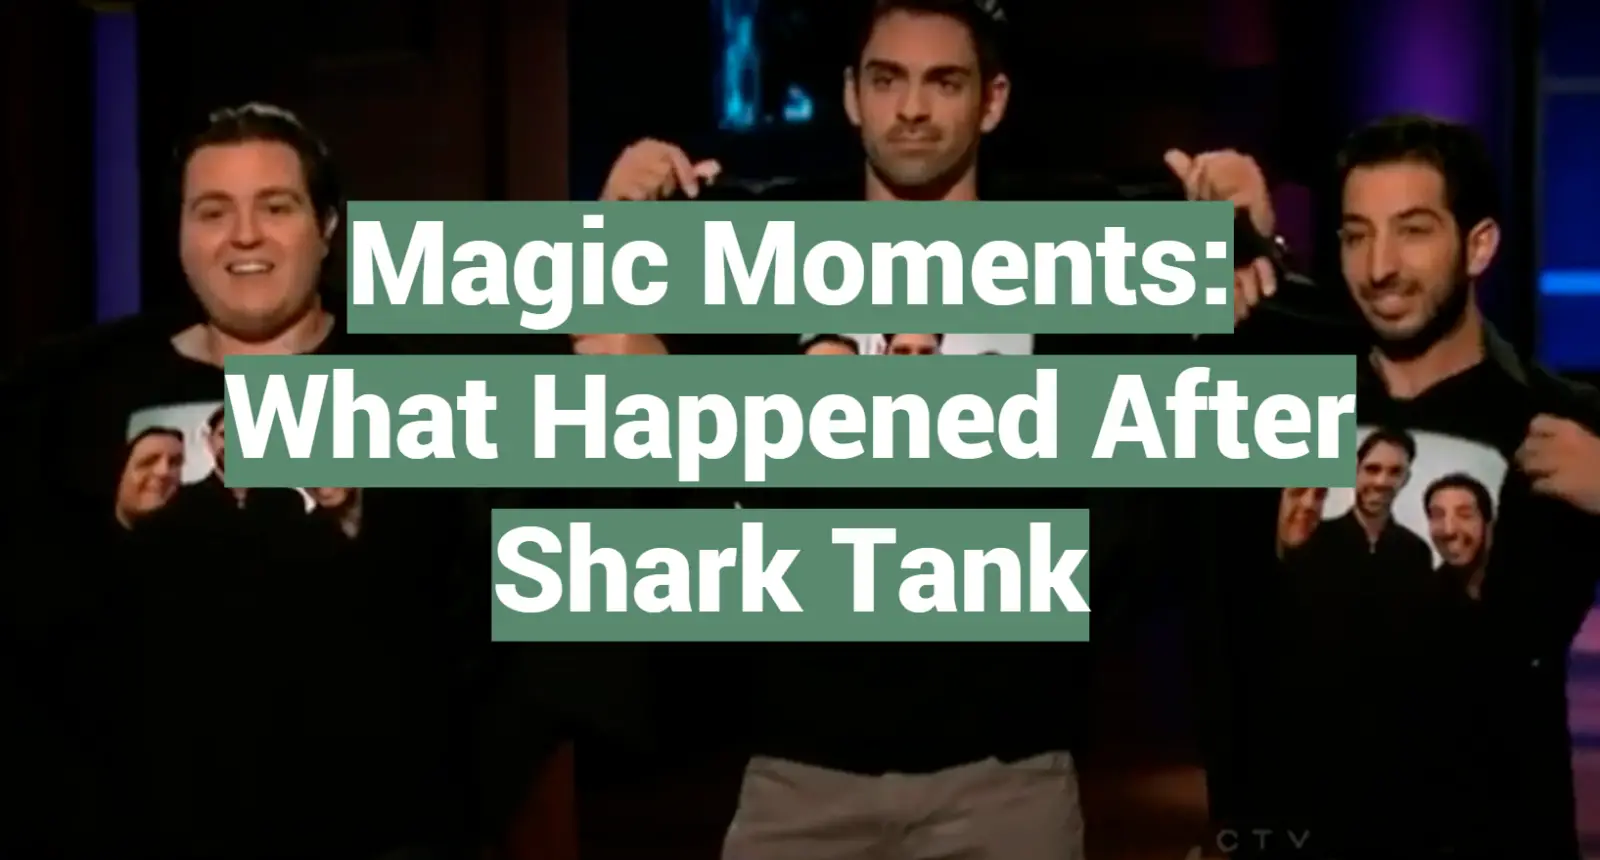 Magic Moments: What Happened After Shark Tank